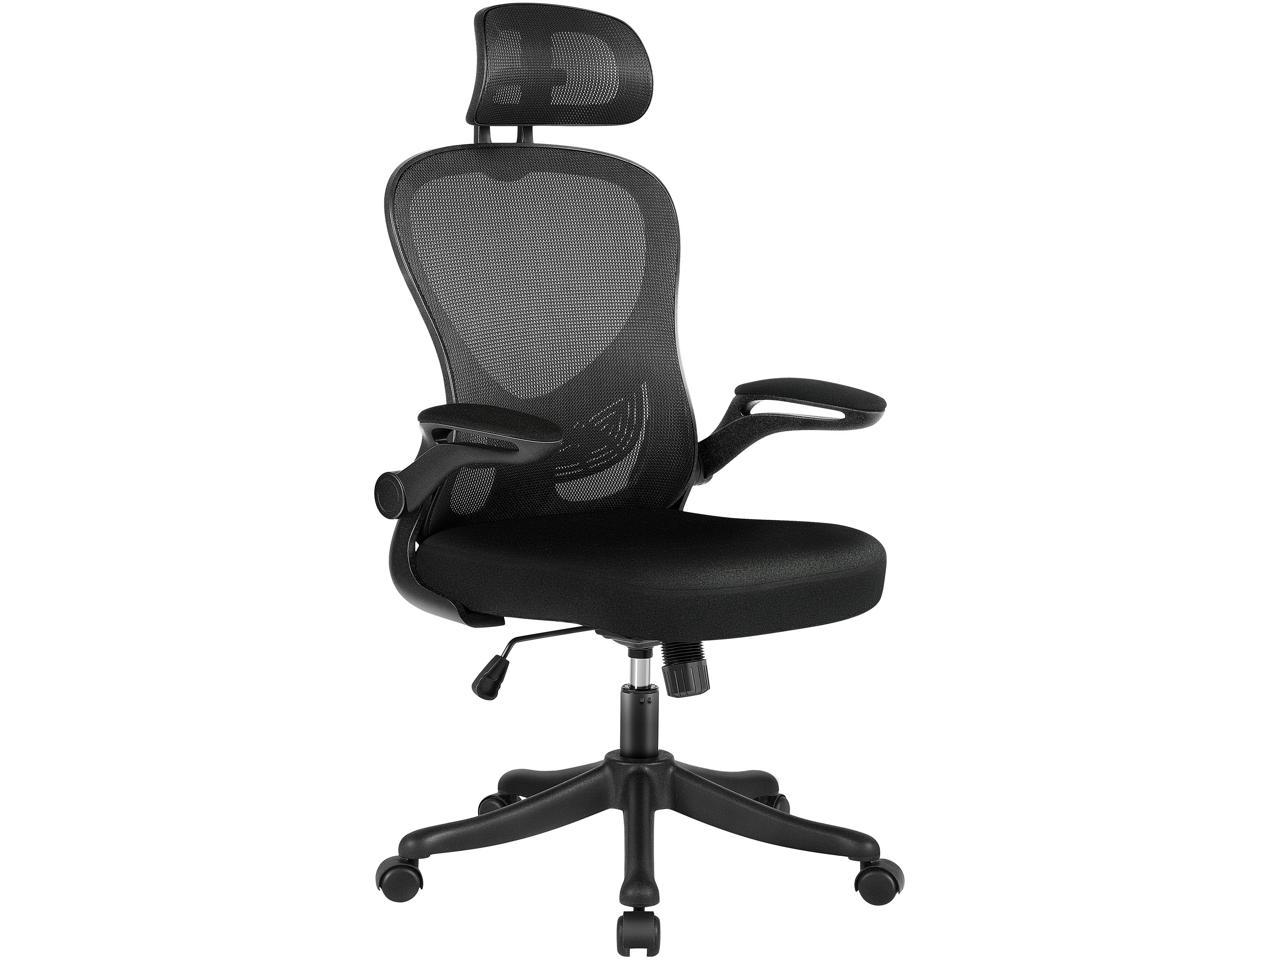 Misolant Desk Chair, Home Office Chair, Task Chair, Mesh Computer Chair, Office Chair with Headrest, Ergonomic Chair with Adjustable Lumbar Support and Flip-up Armrest for Work or Study